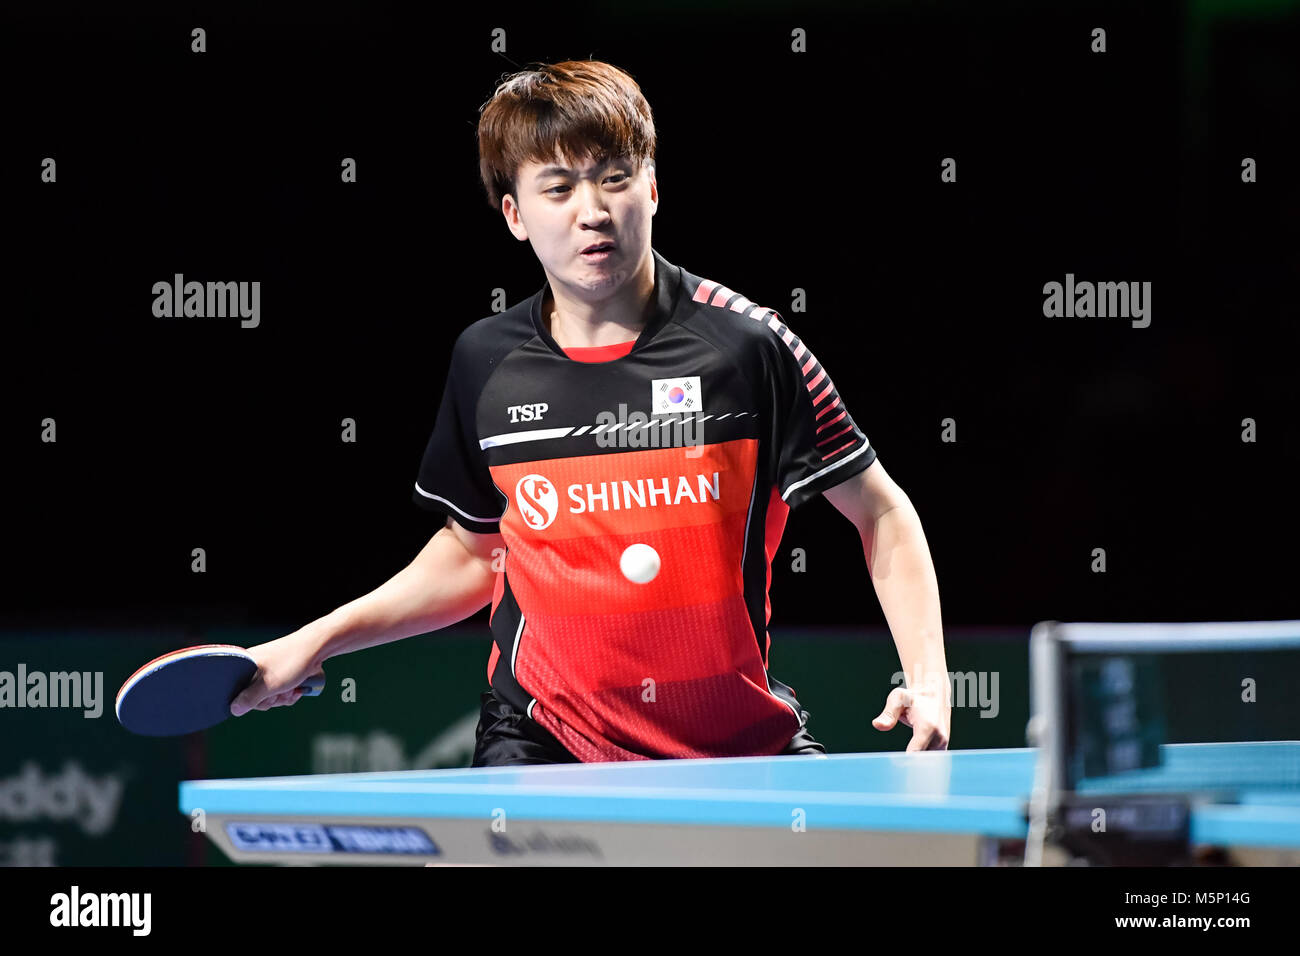 London, UK. 24th February, 2018. Jeoung Youngsik of Korea Republic during  International Table Tennis Federation Team World Cup - Men's Semi-Final  match between Koki Niwa against Jeoung Youngsik of Korea Republic at